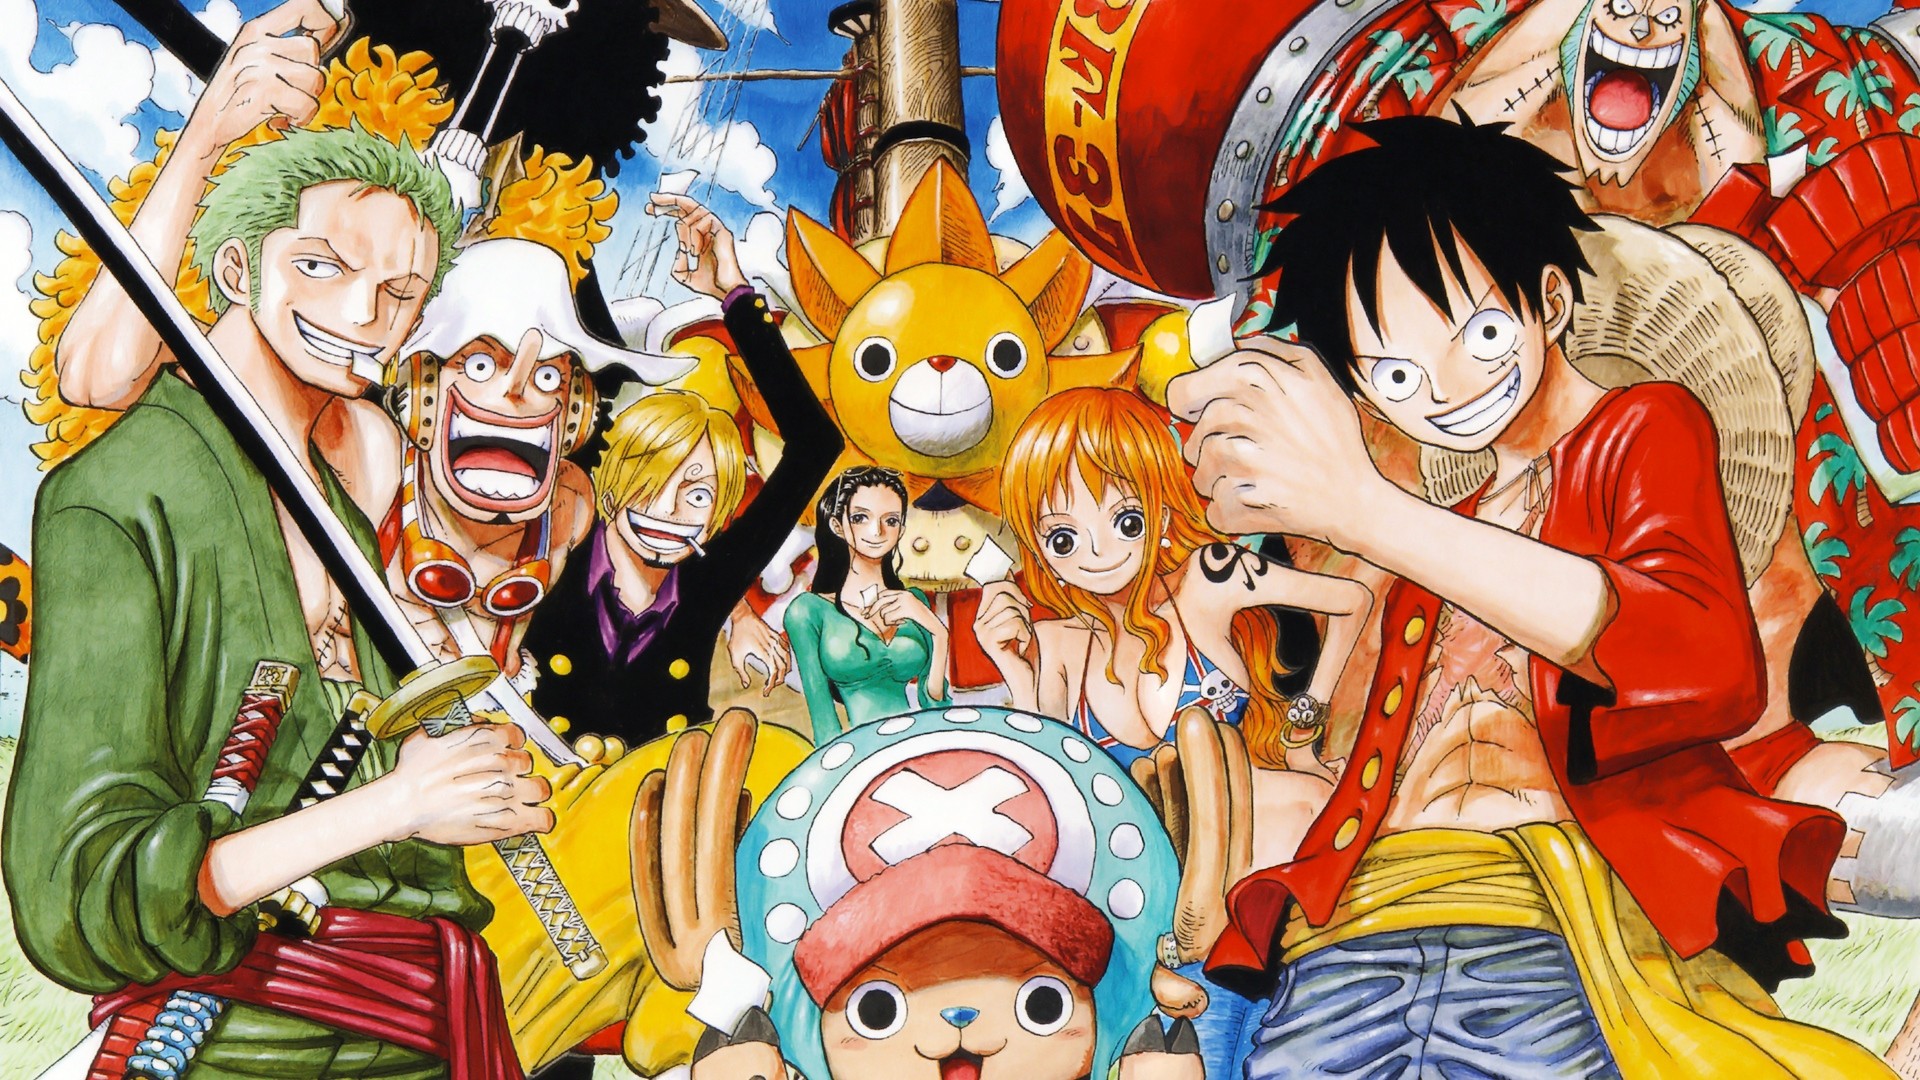 1920x1080 Best ideas about One Piece Wallpaper Iphone on Pinterest One 1920Ã1080 One  Piece Images